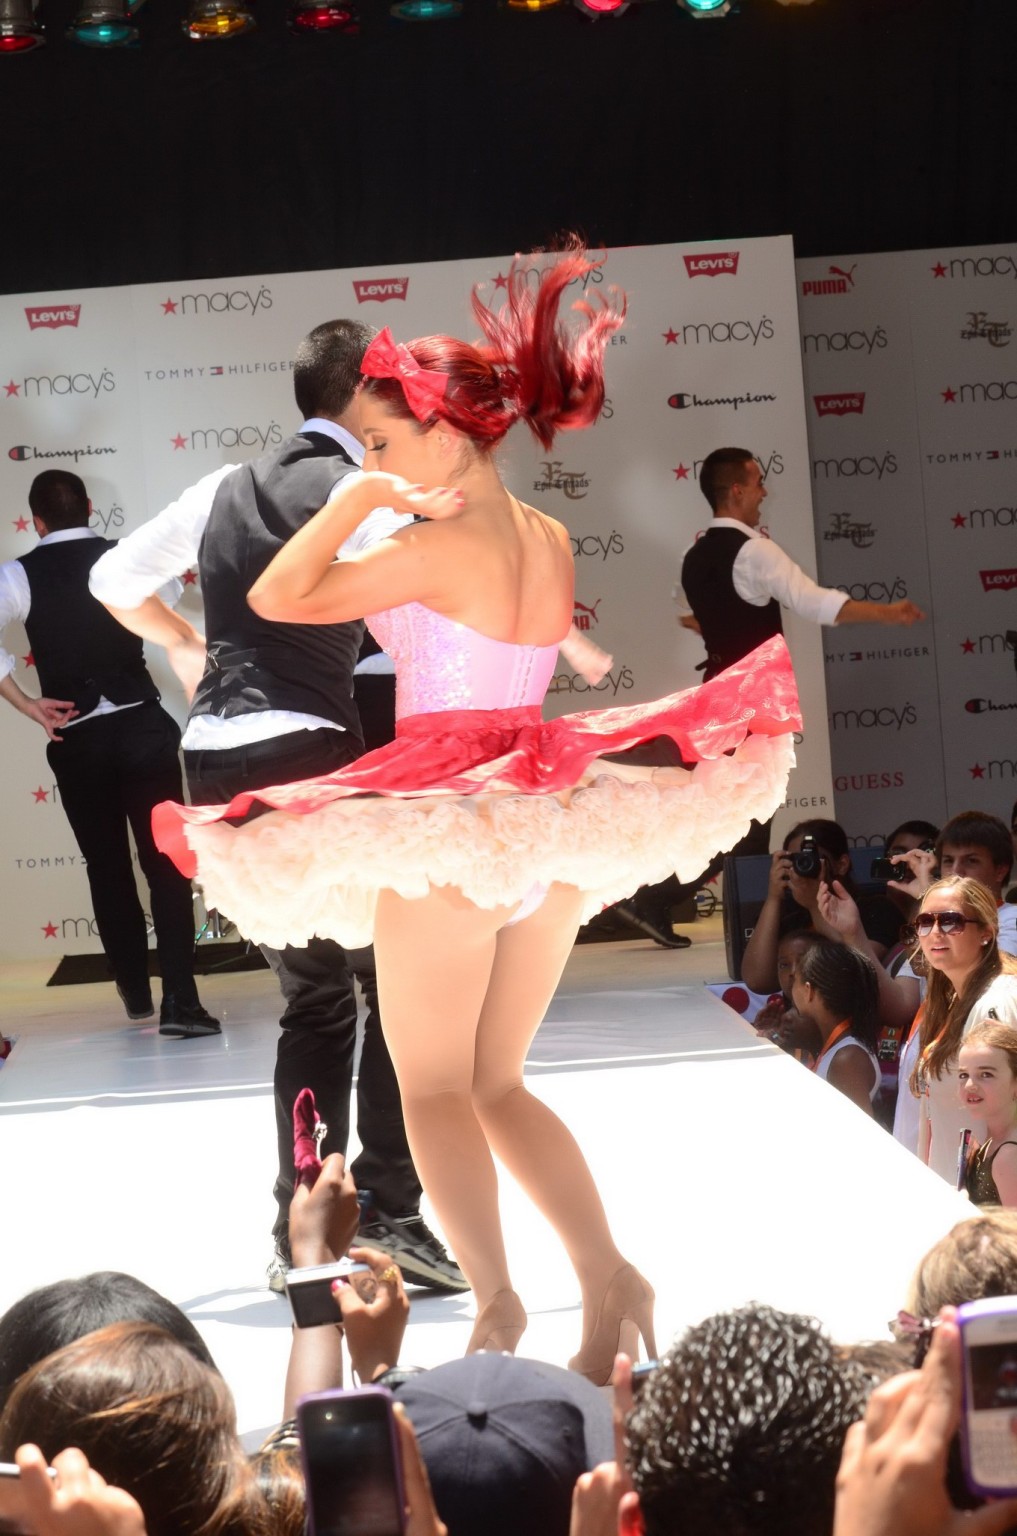 Ariana Grande flashing her panties at Macy's Annual Summer Blowout Show in NYC #75286871